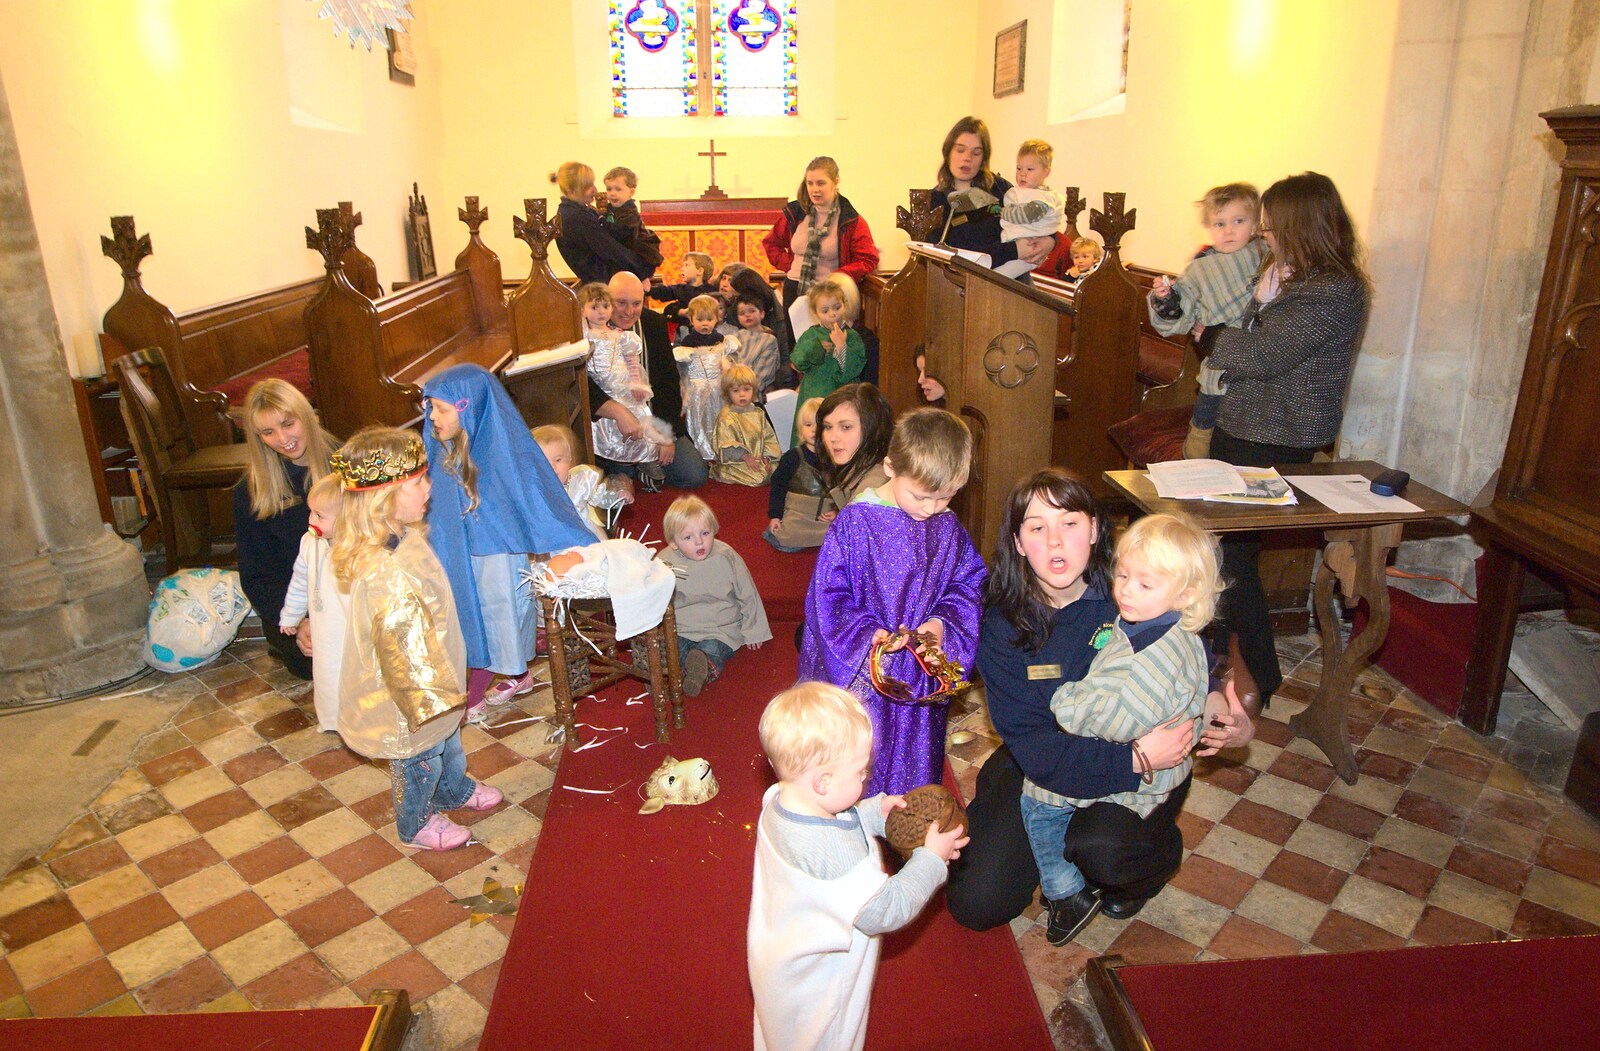 It's sprog chaos in the church from Fred's First Nativity, St. Peter's Church, Palgrave, Suffolk - 8th December 2011